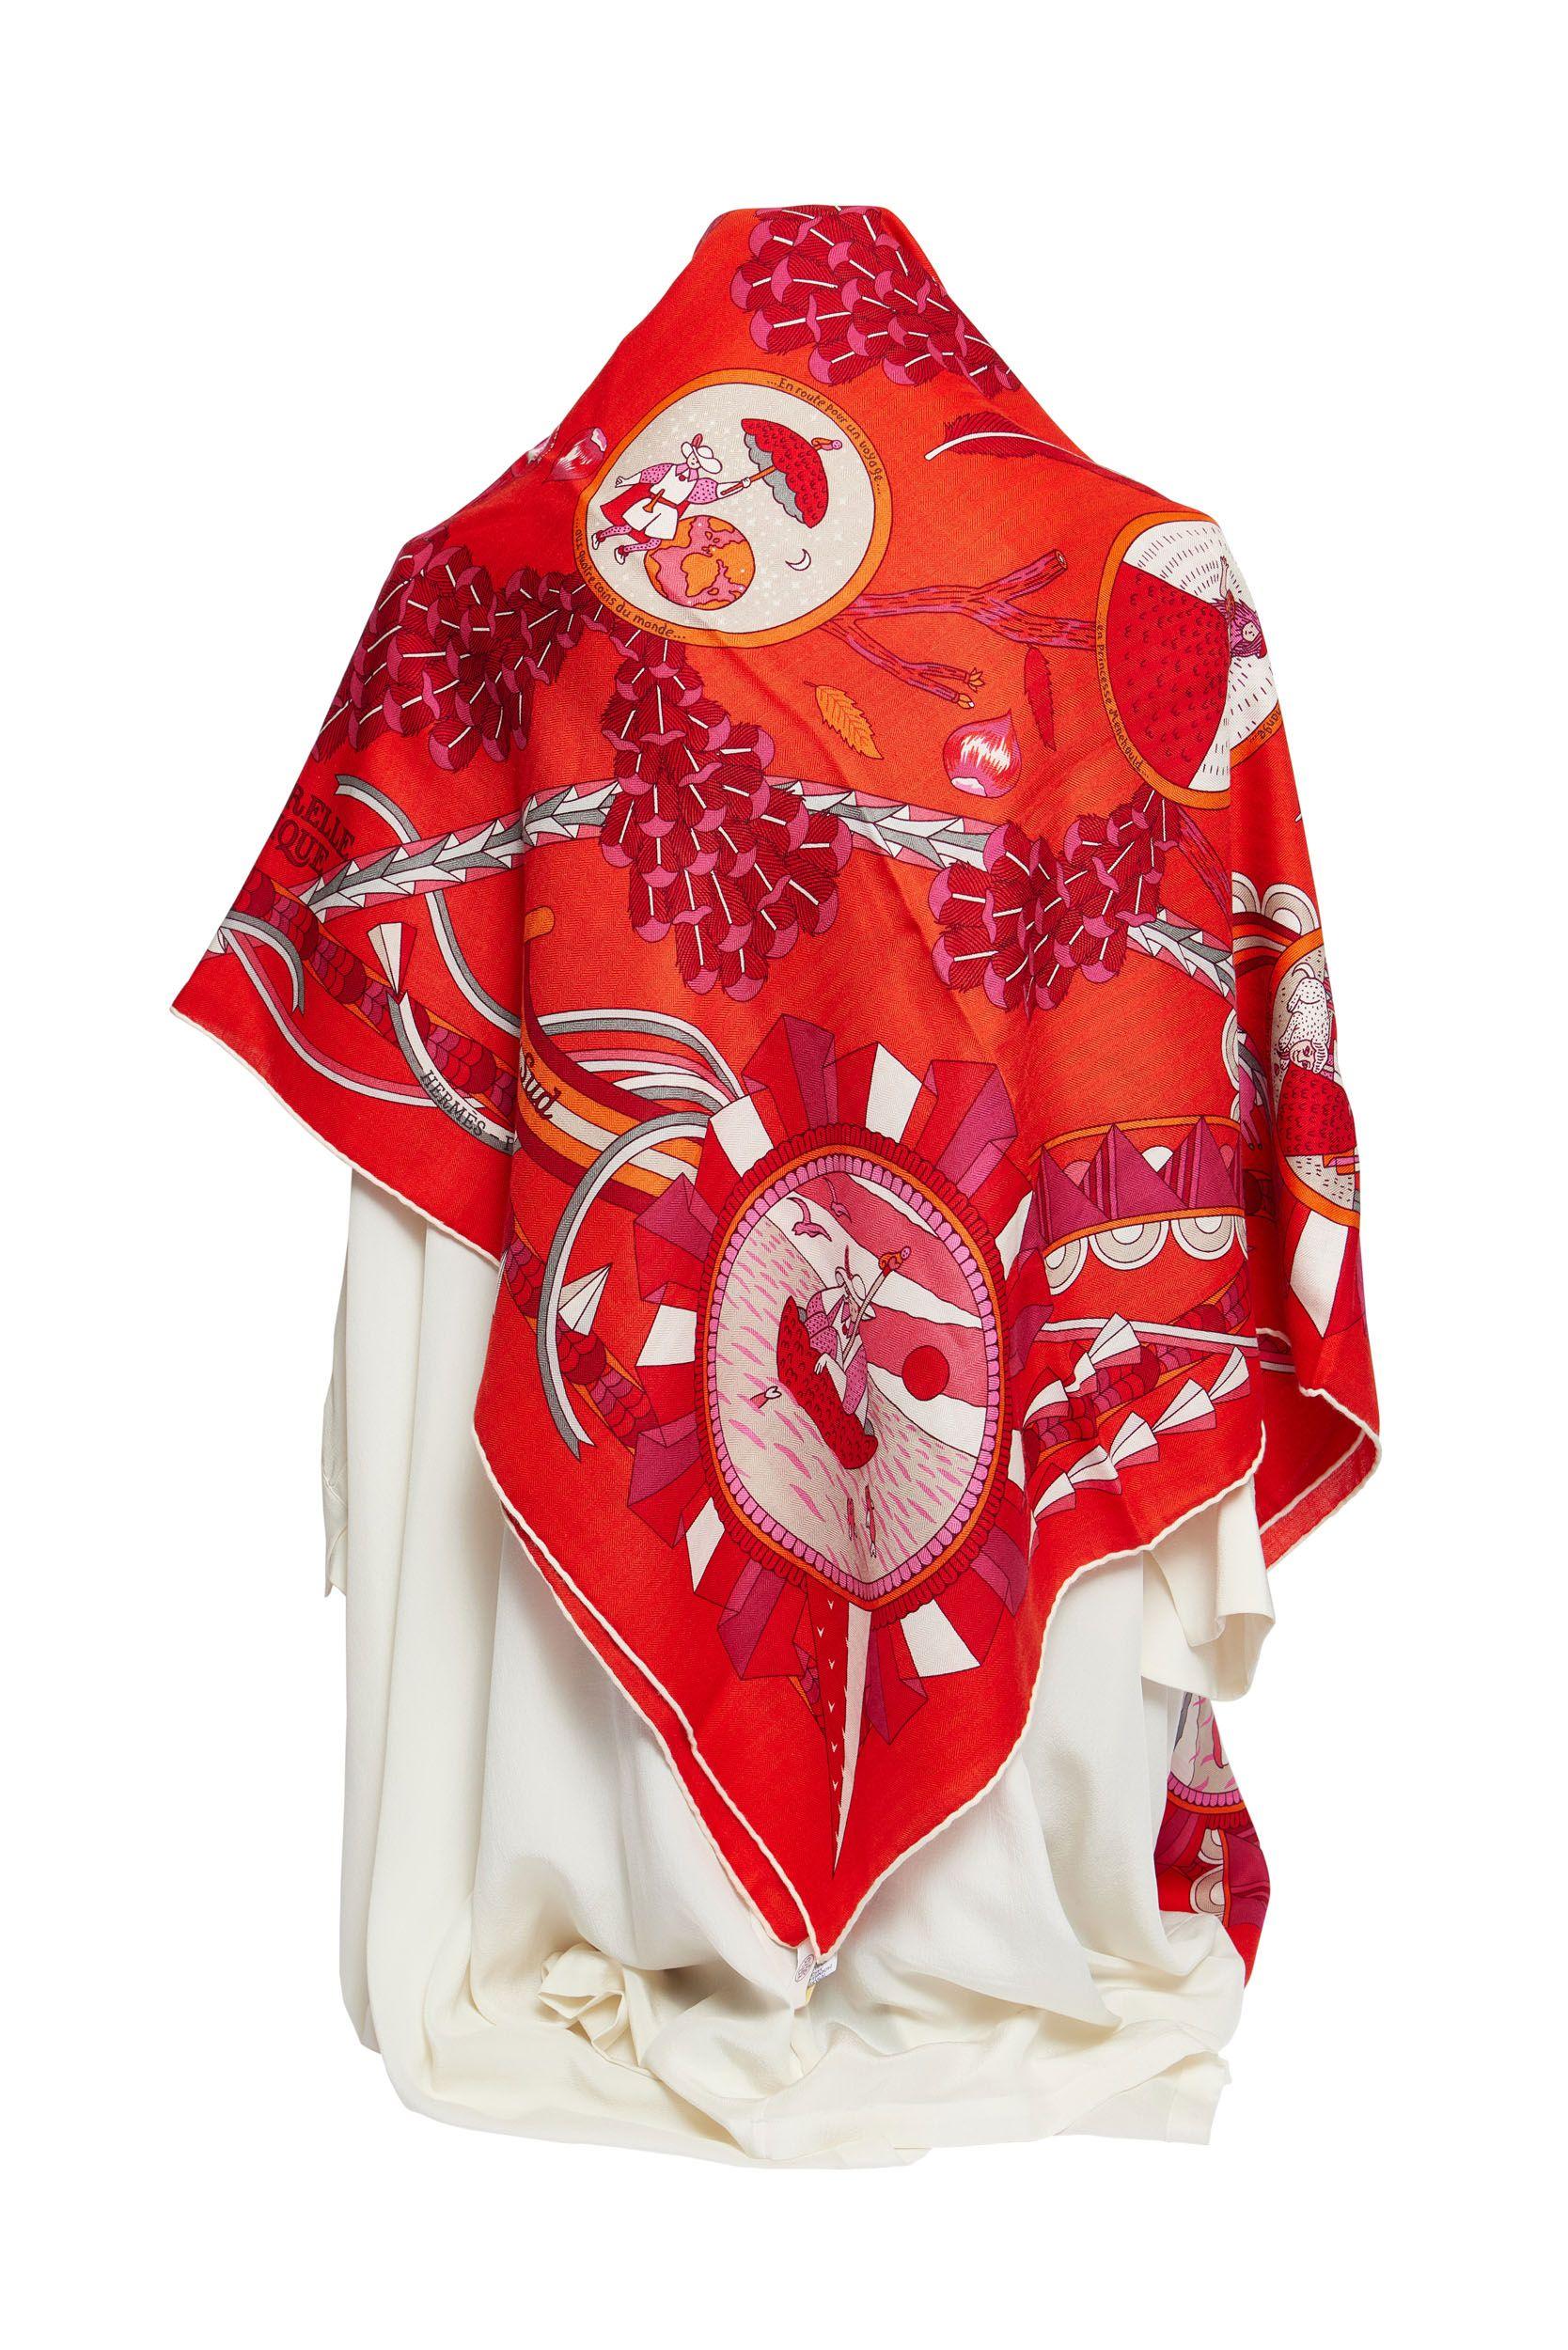 Hermès new geometric red and white shawl. Silk and cashmere blend. Hand rolled edges.